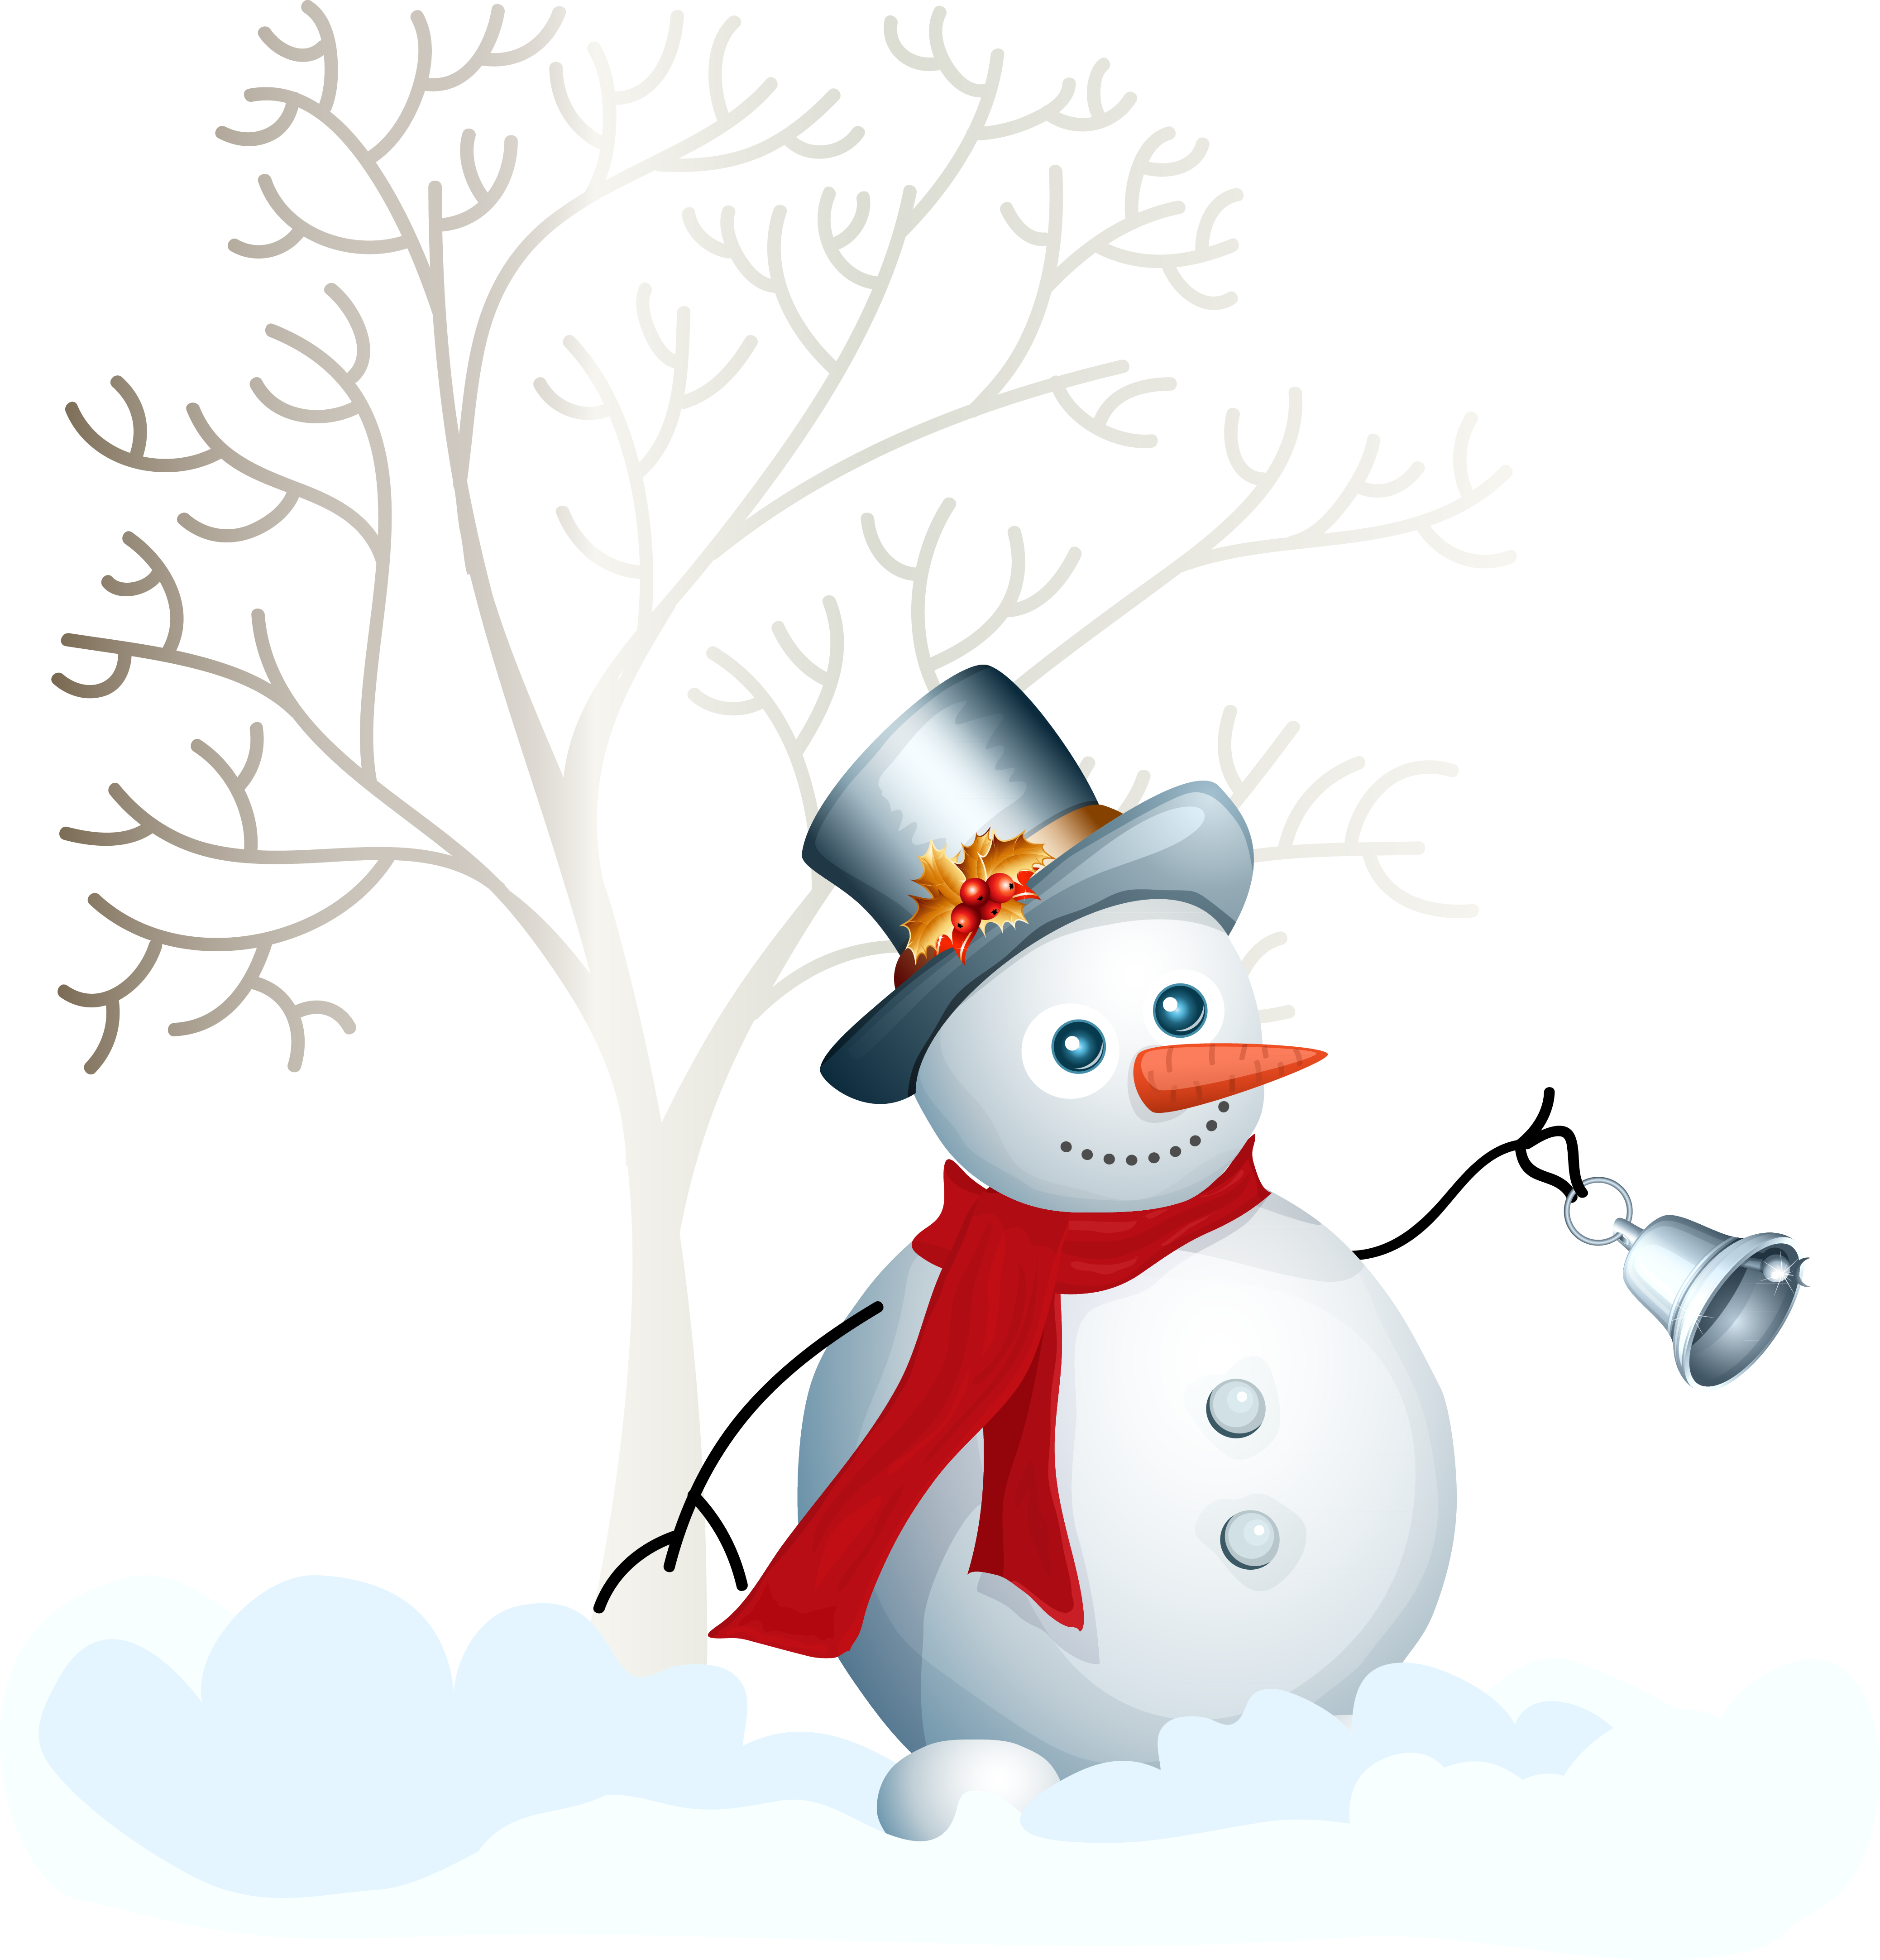 Winter Cute Snowing Christmas Snowman GIF GIF PNG Images